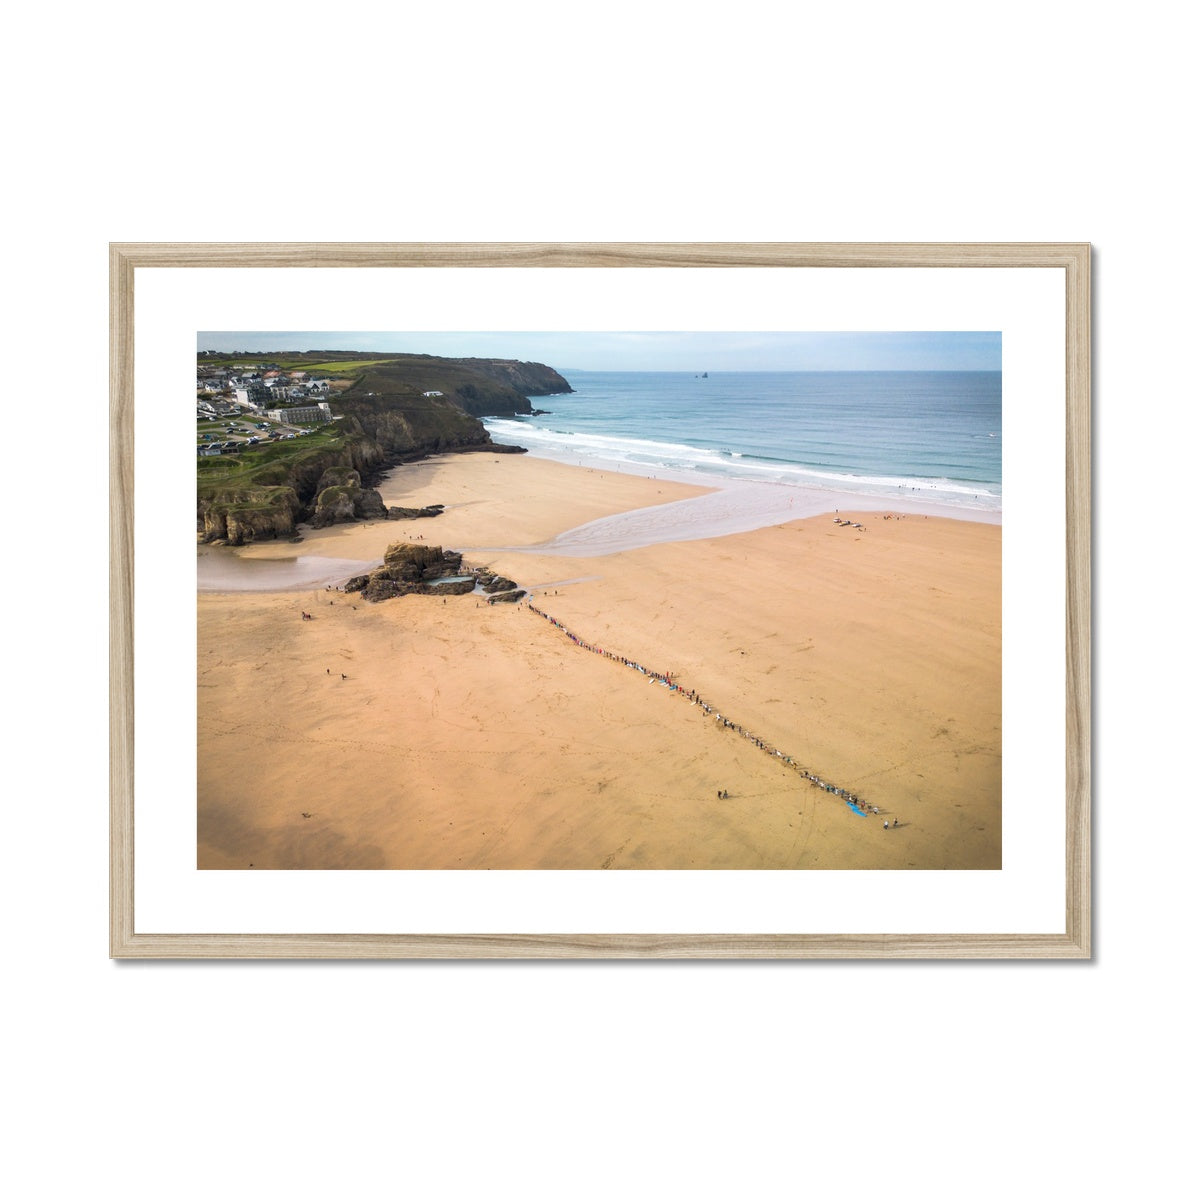 Human Chain Protest Perranporth ~ Framed & Mounted Print